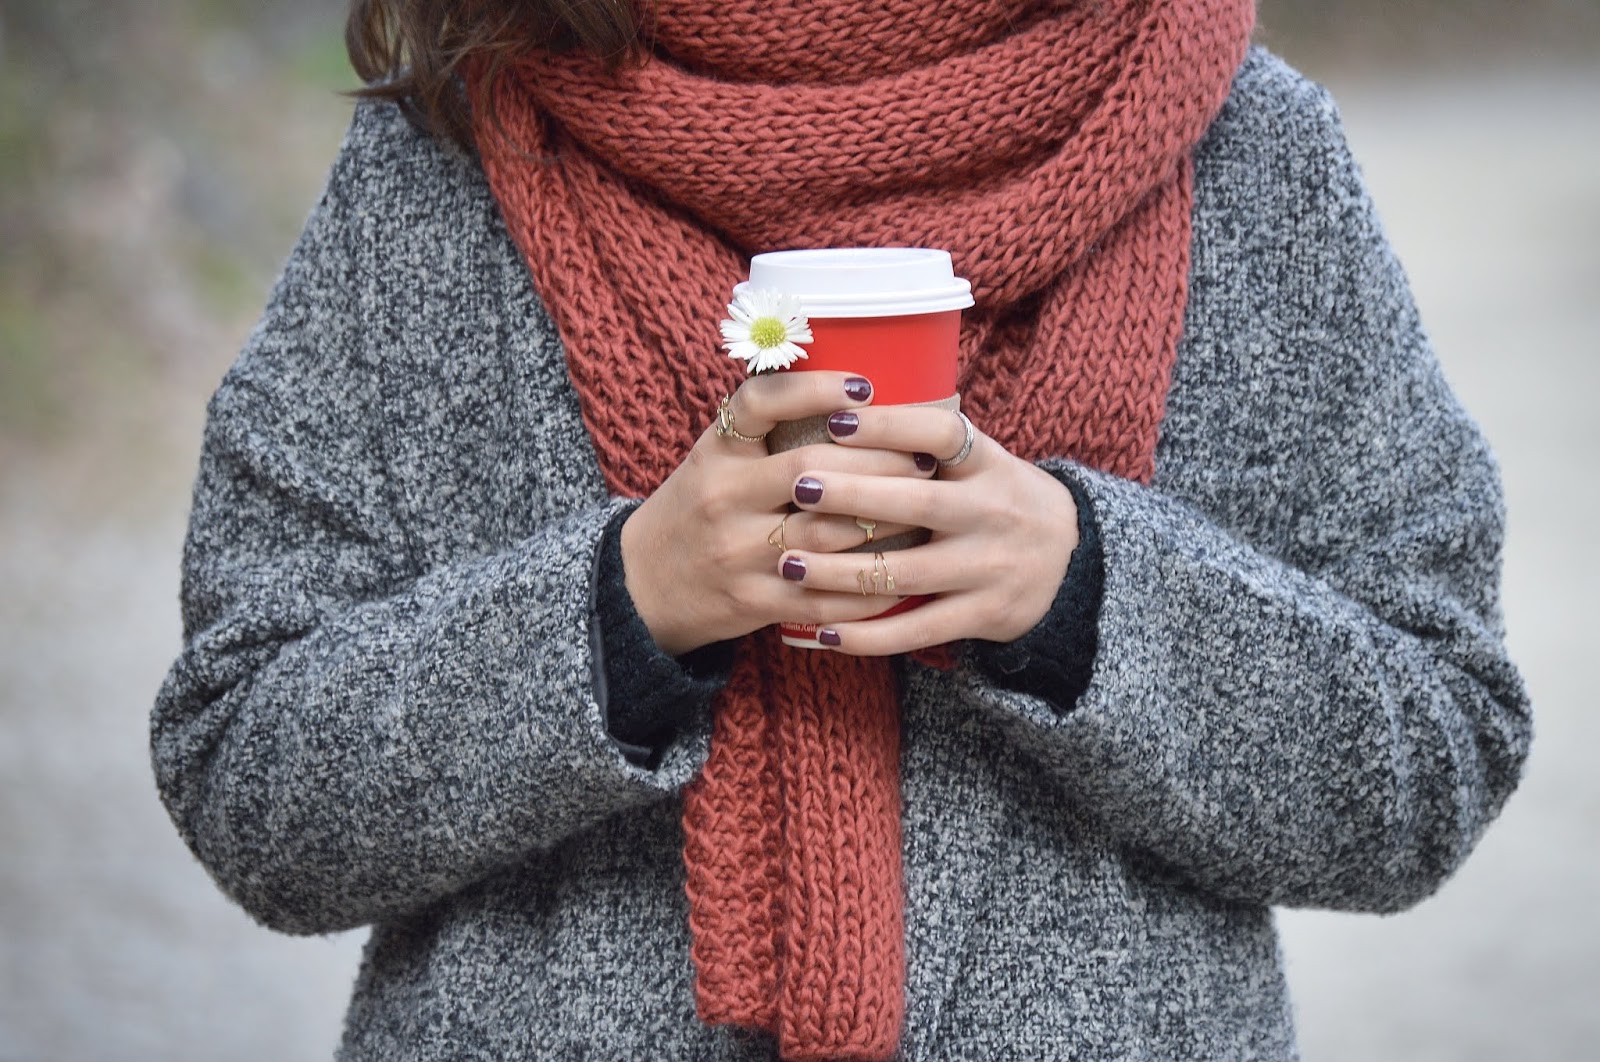 Wearing a Sweater, Accessories with a Scarf: